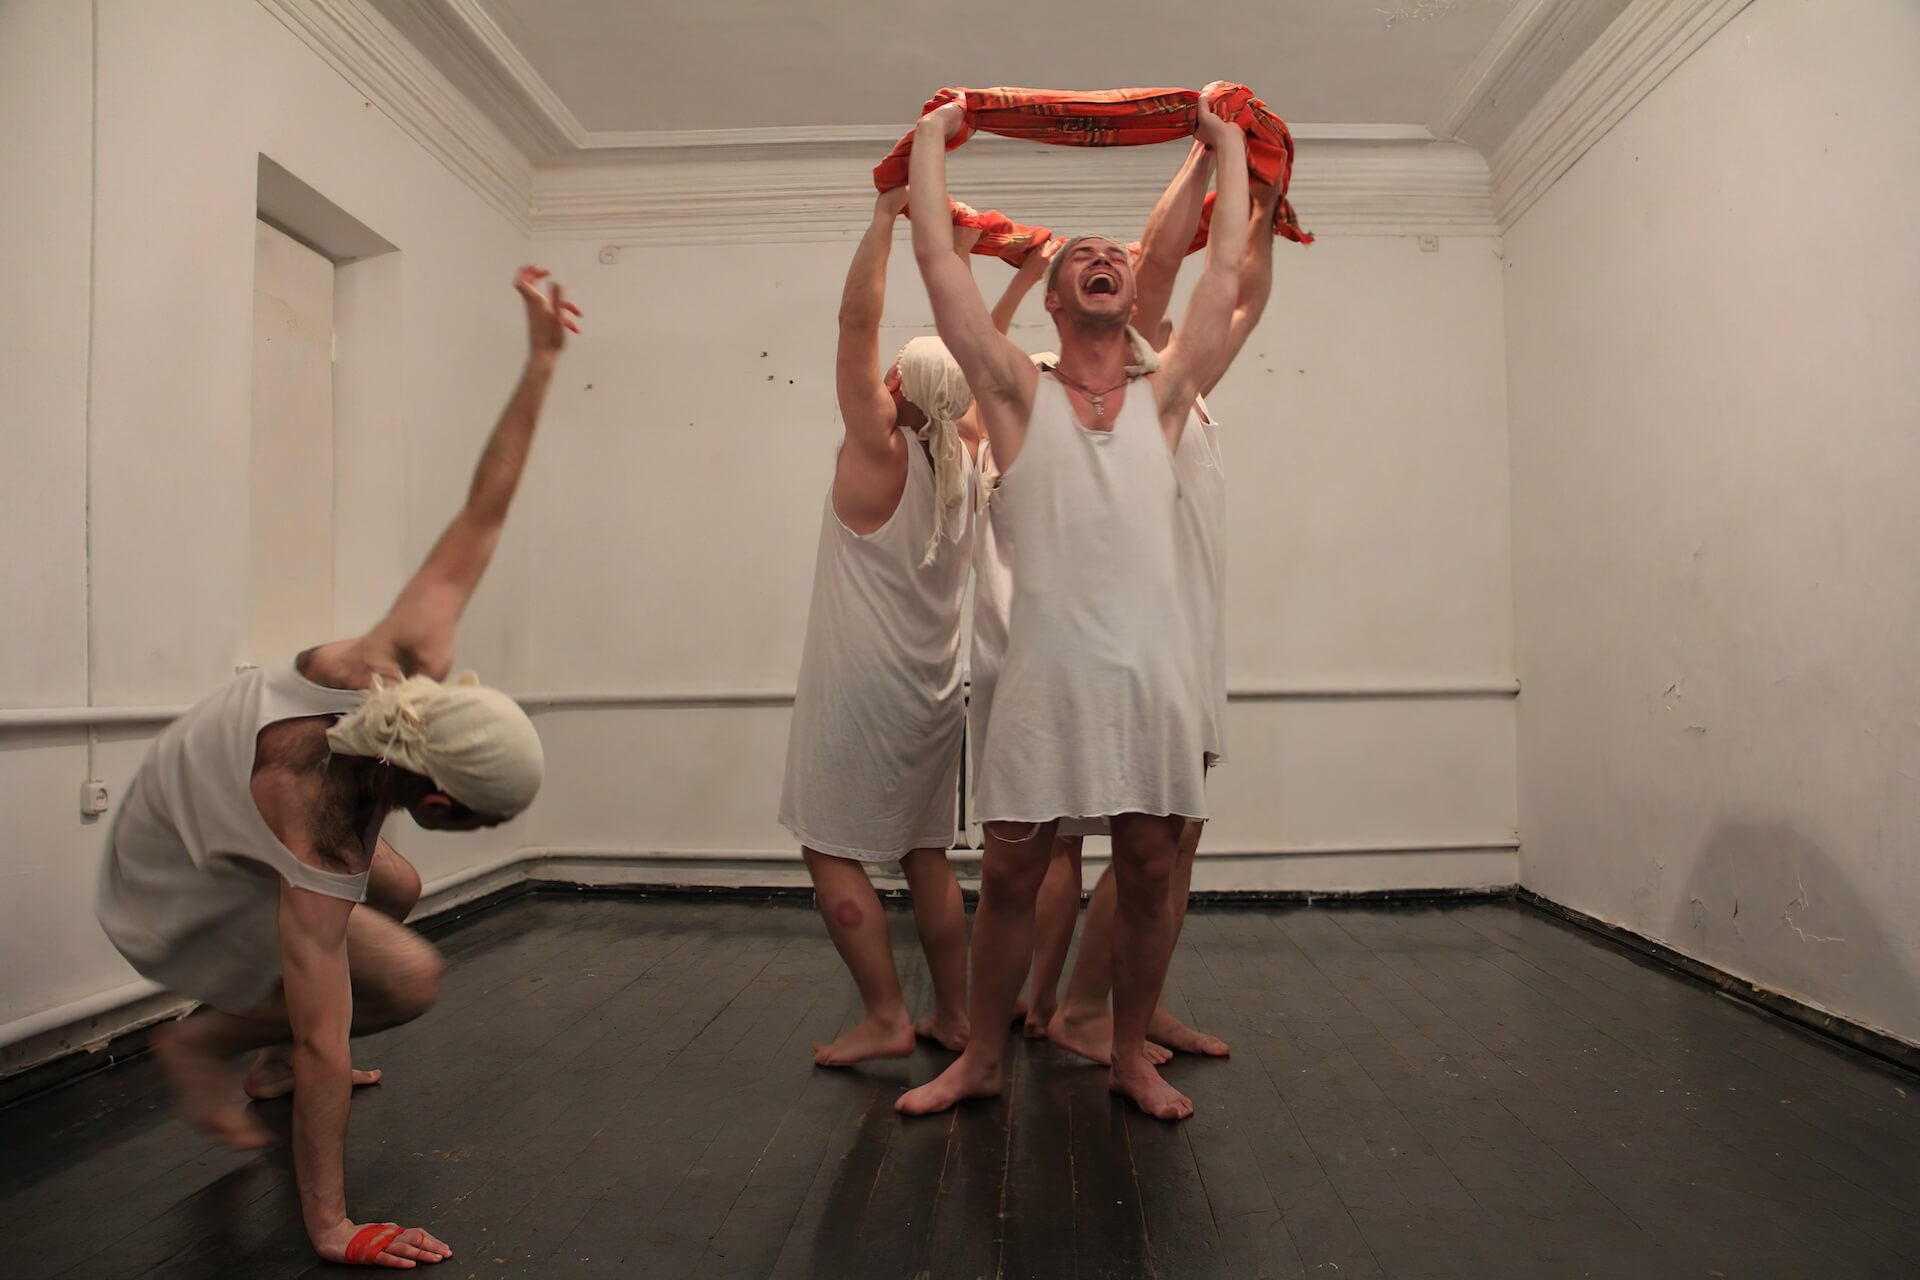 Four performers holding the red blanket up and shouting. One other performer in on the ground with one arm on the floor and the other in the air